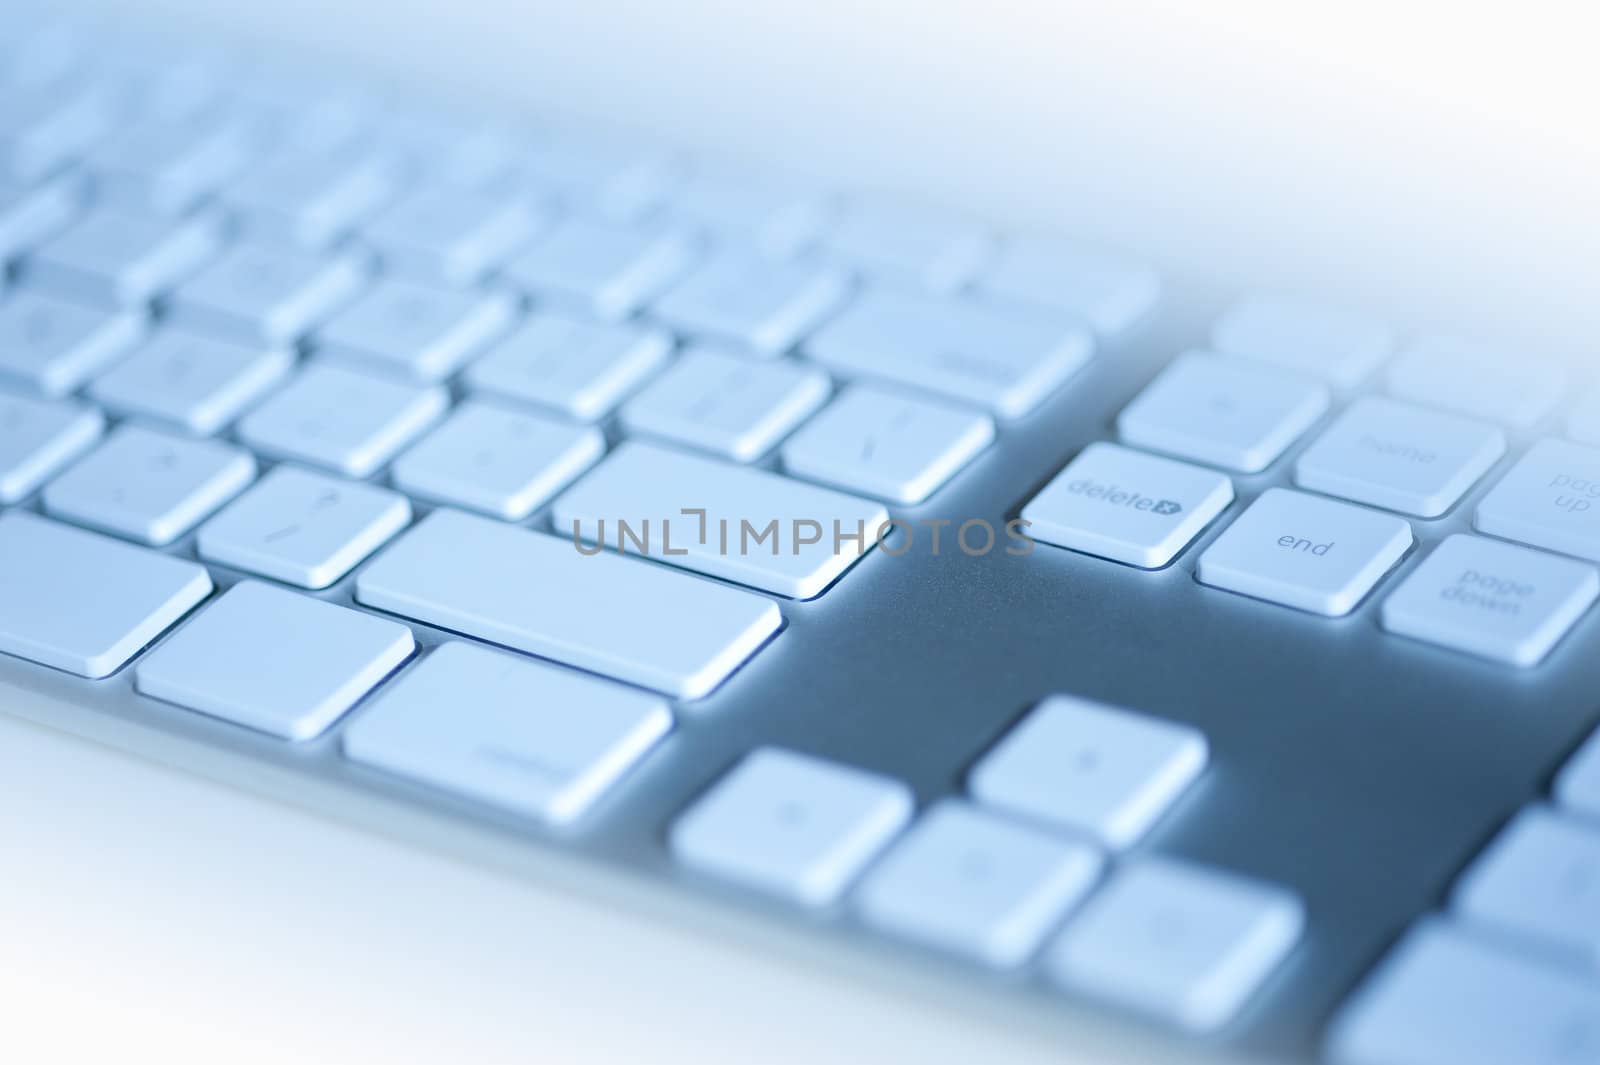 Keyboard in blues with limited depth of field